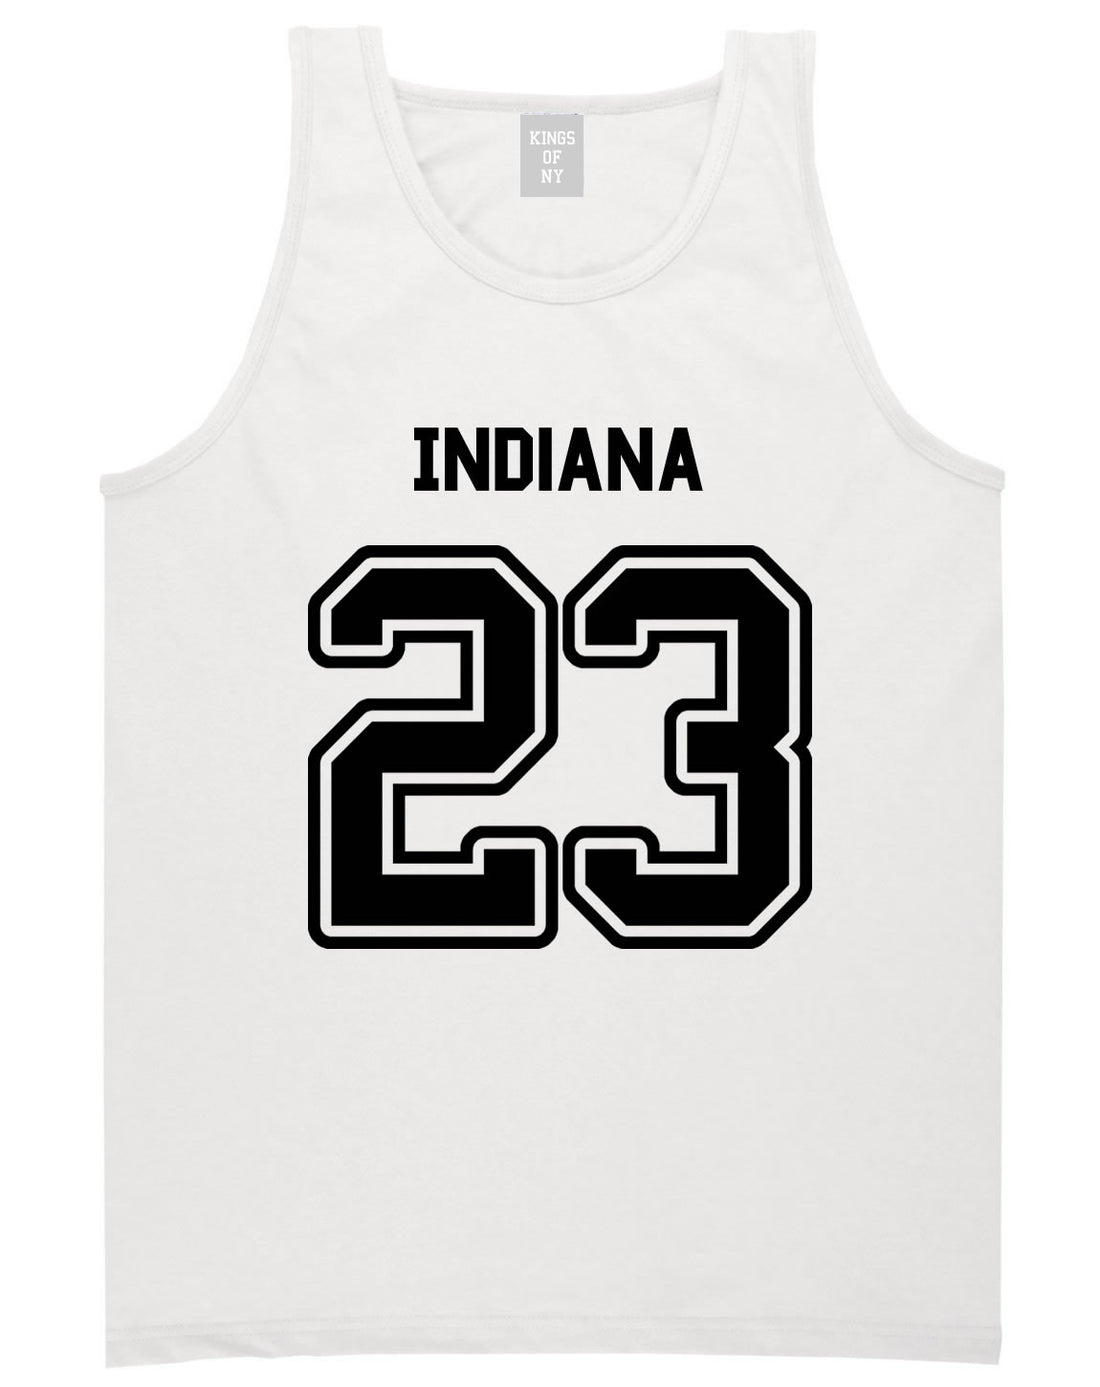 Sport Style Indiana 23 Team State Jersey Mens Tank Top By Kings Of NY